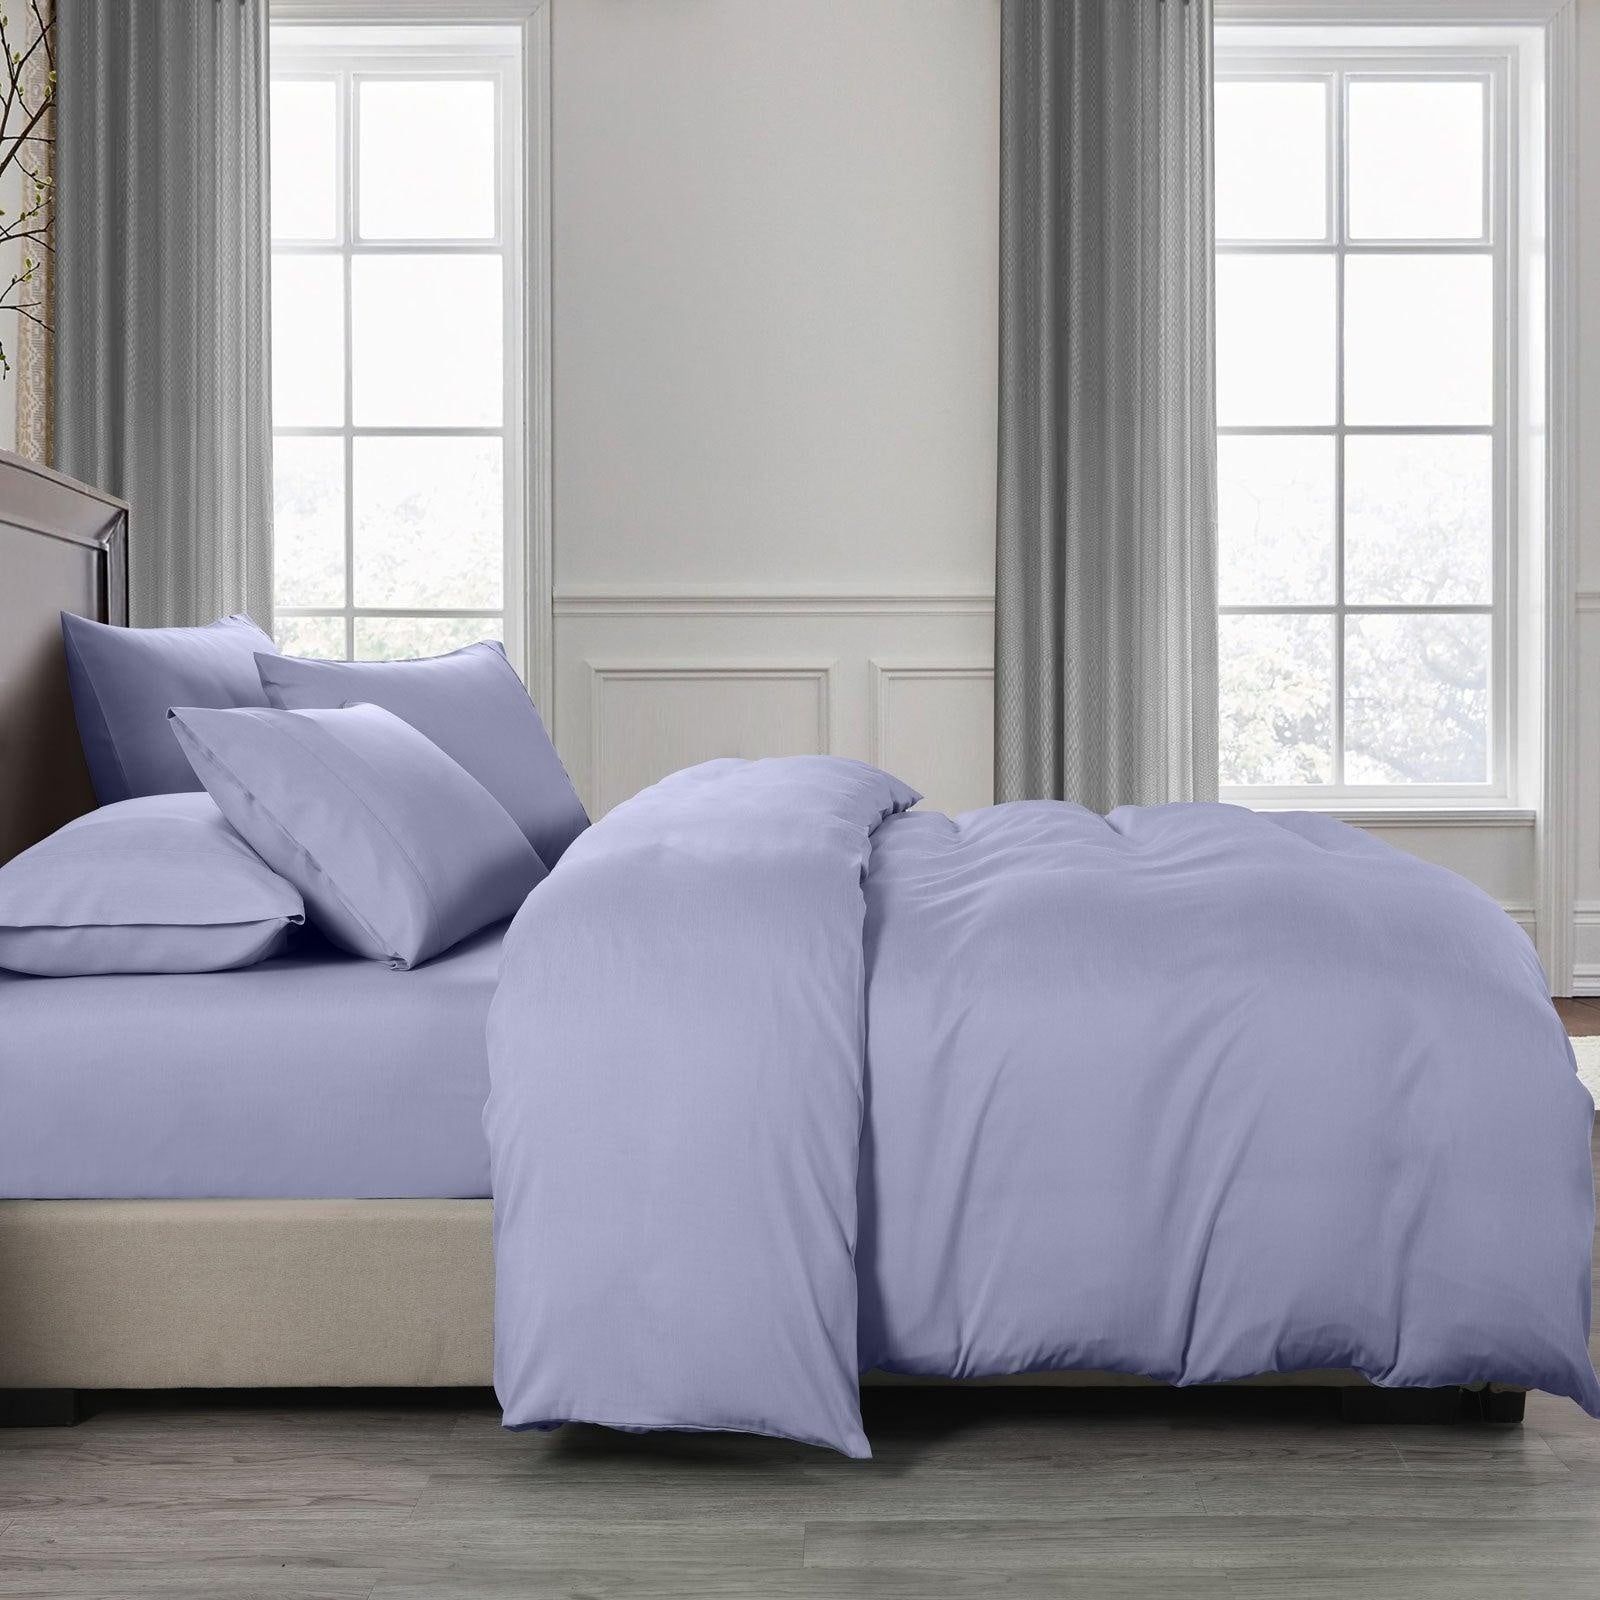 Royal Comfort 2000TC Quilt Cover Set Bamboo Cooling Hypoallergenic Breathable Lilac Grey King Deals499